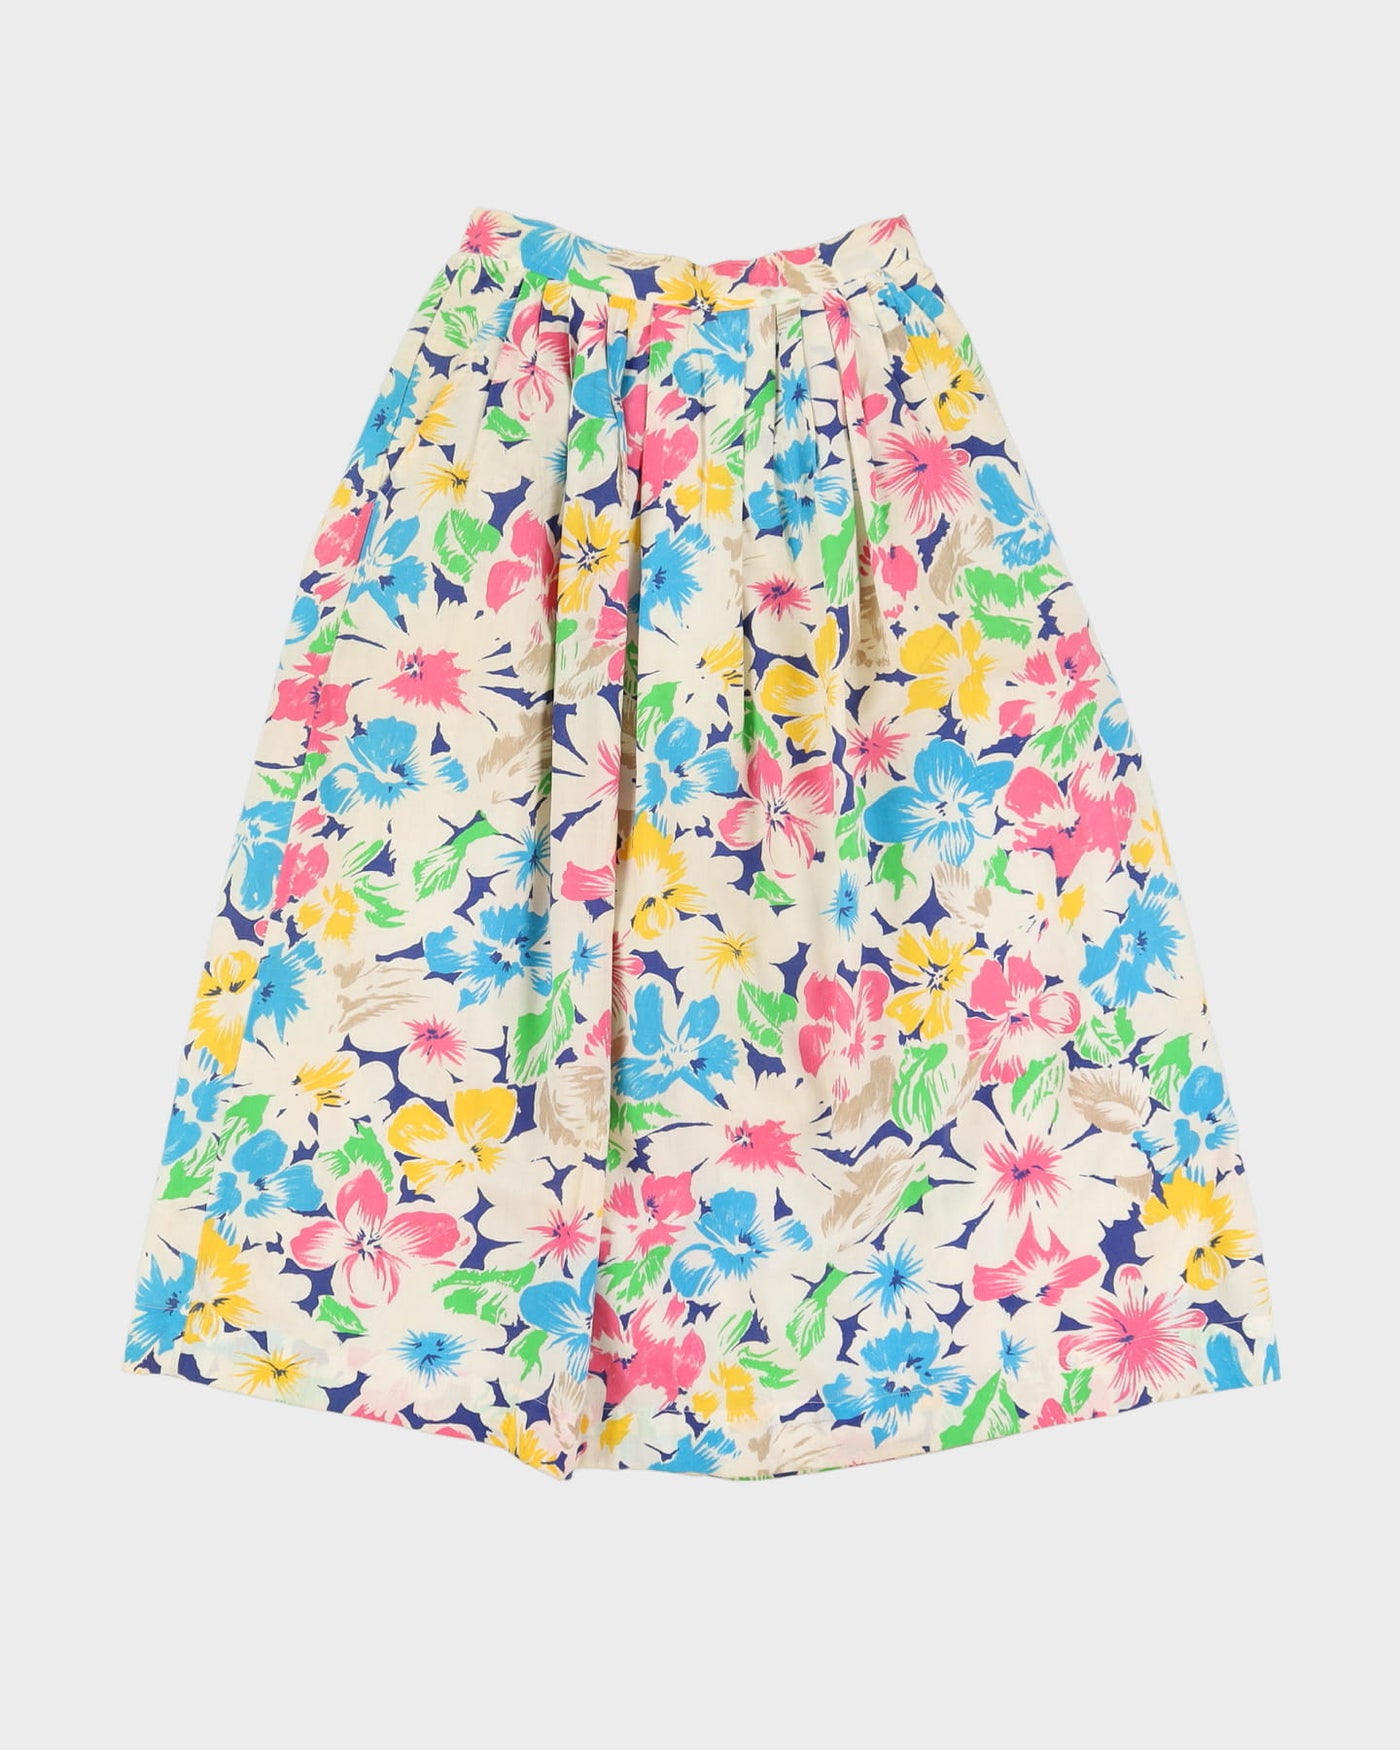 Vintage White With A Floral Pattern Skirt - XS